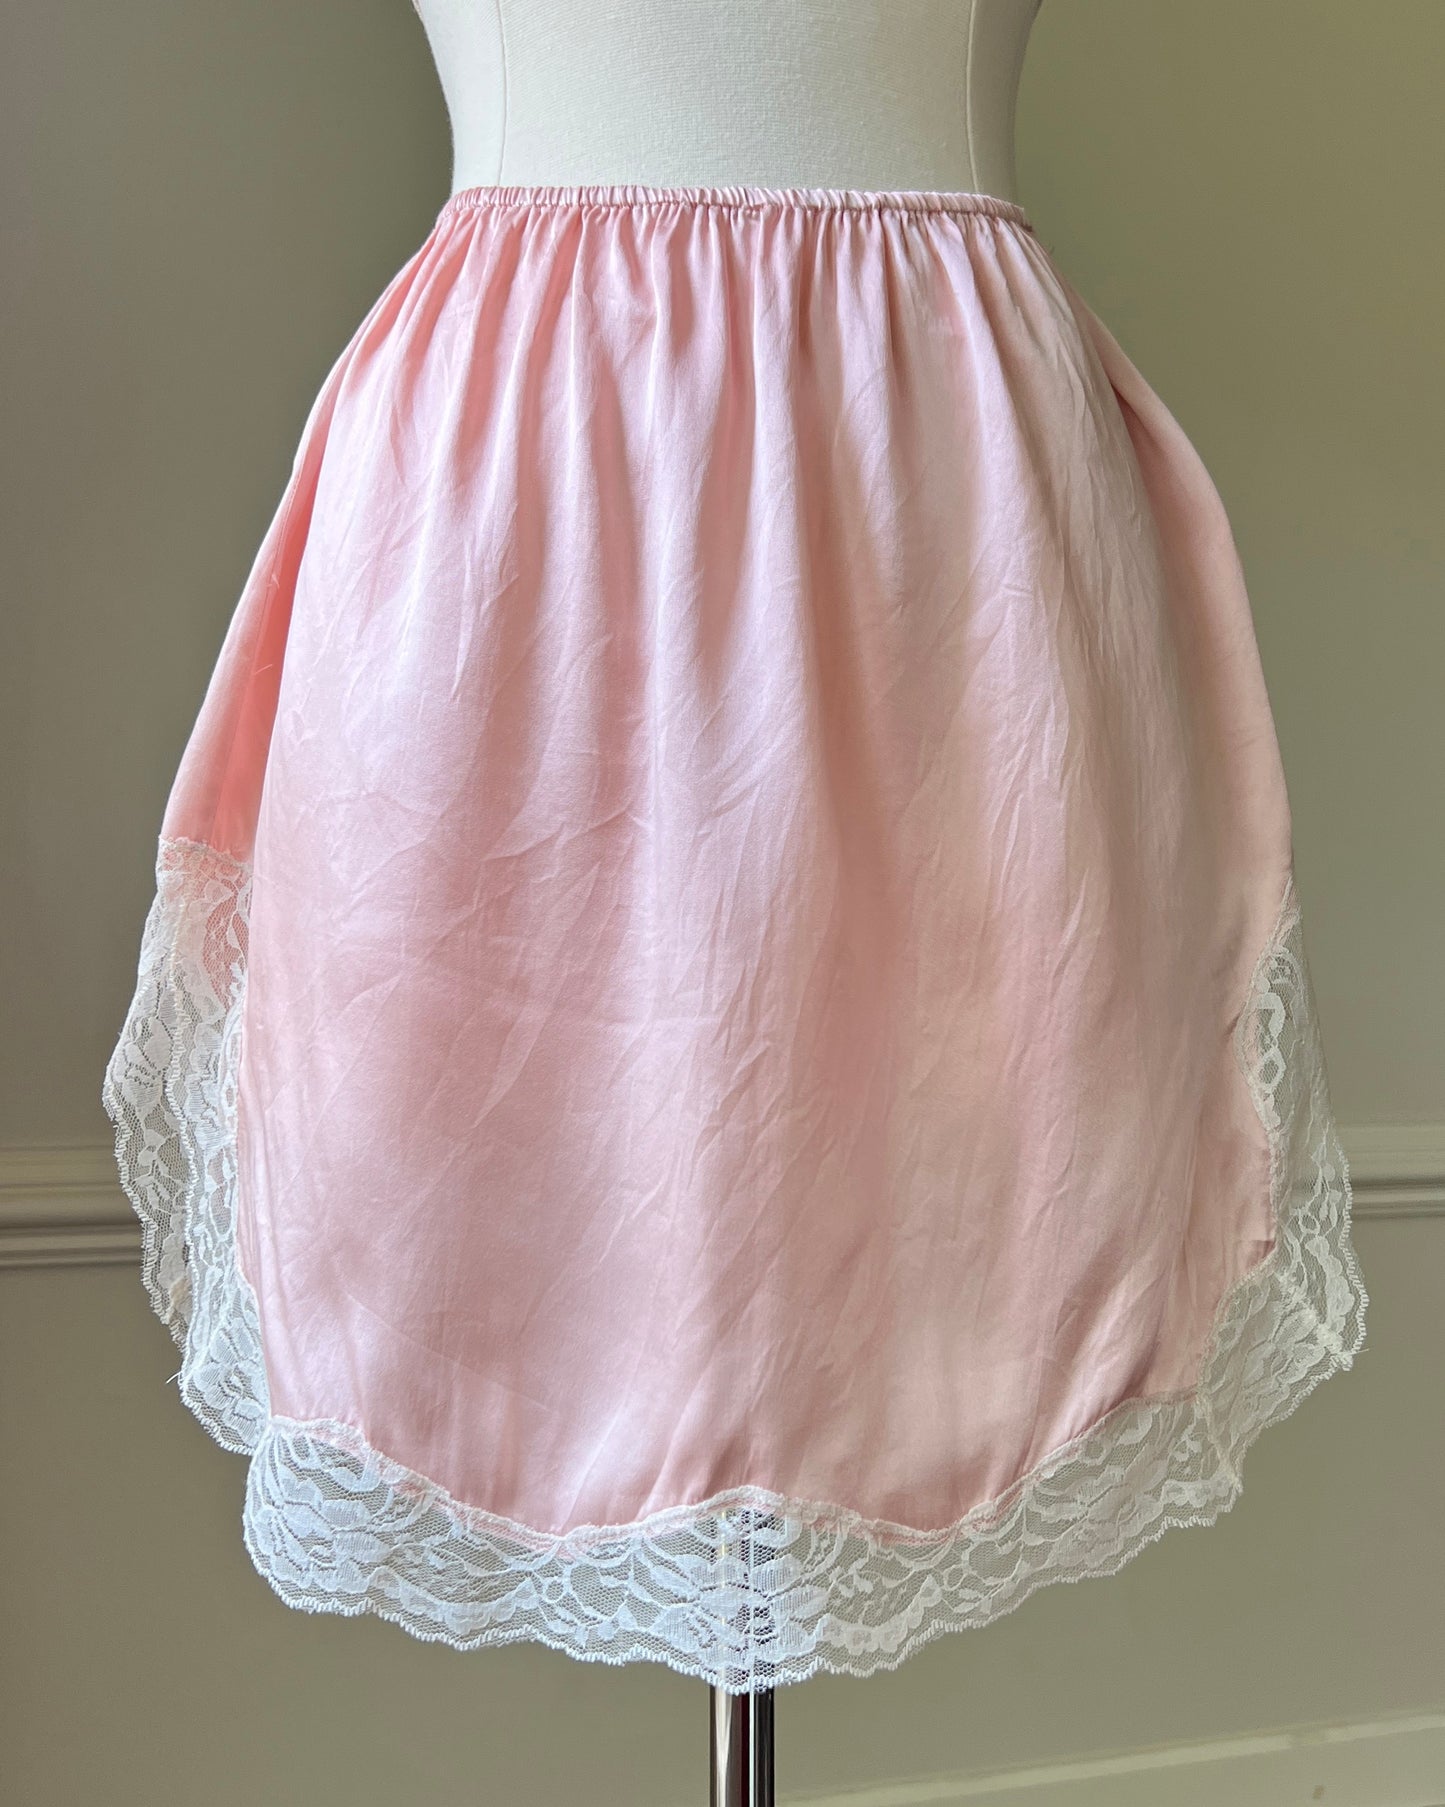 Victoria’s Secret Silky Satin Round Skirt featuring Split Hems with Sheer Lace